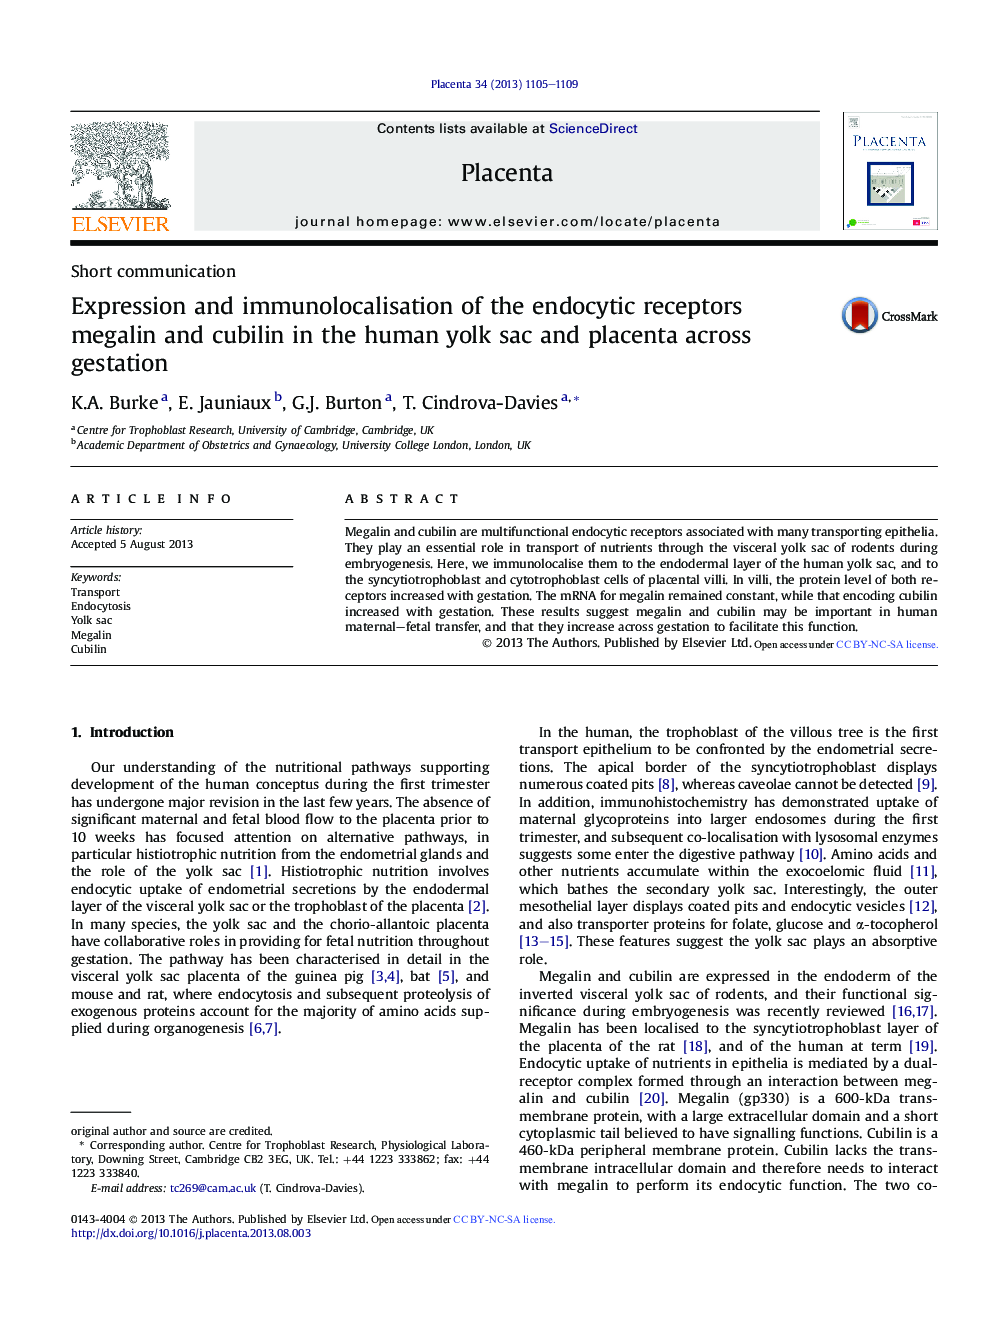 Expression and immunolocalisation of the endocytic receptors megalin and cubilin in the human yolk sac and placenta across gestation